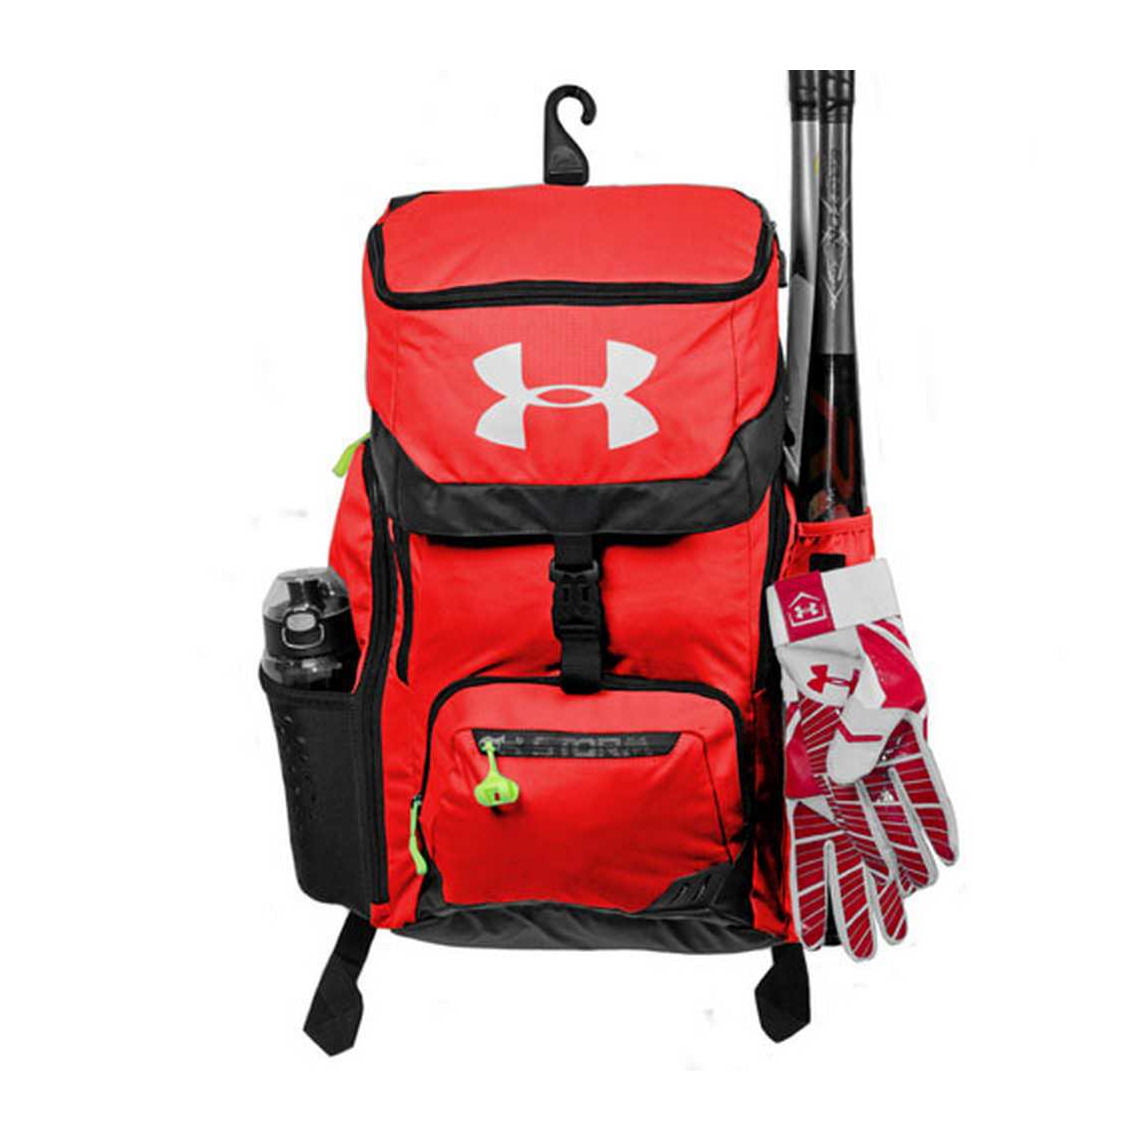 under armour bat bags backpack